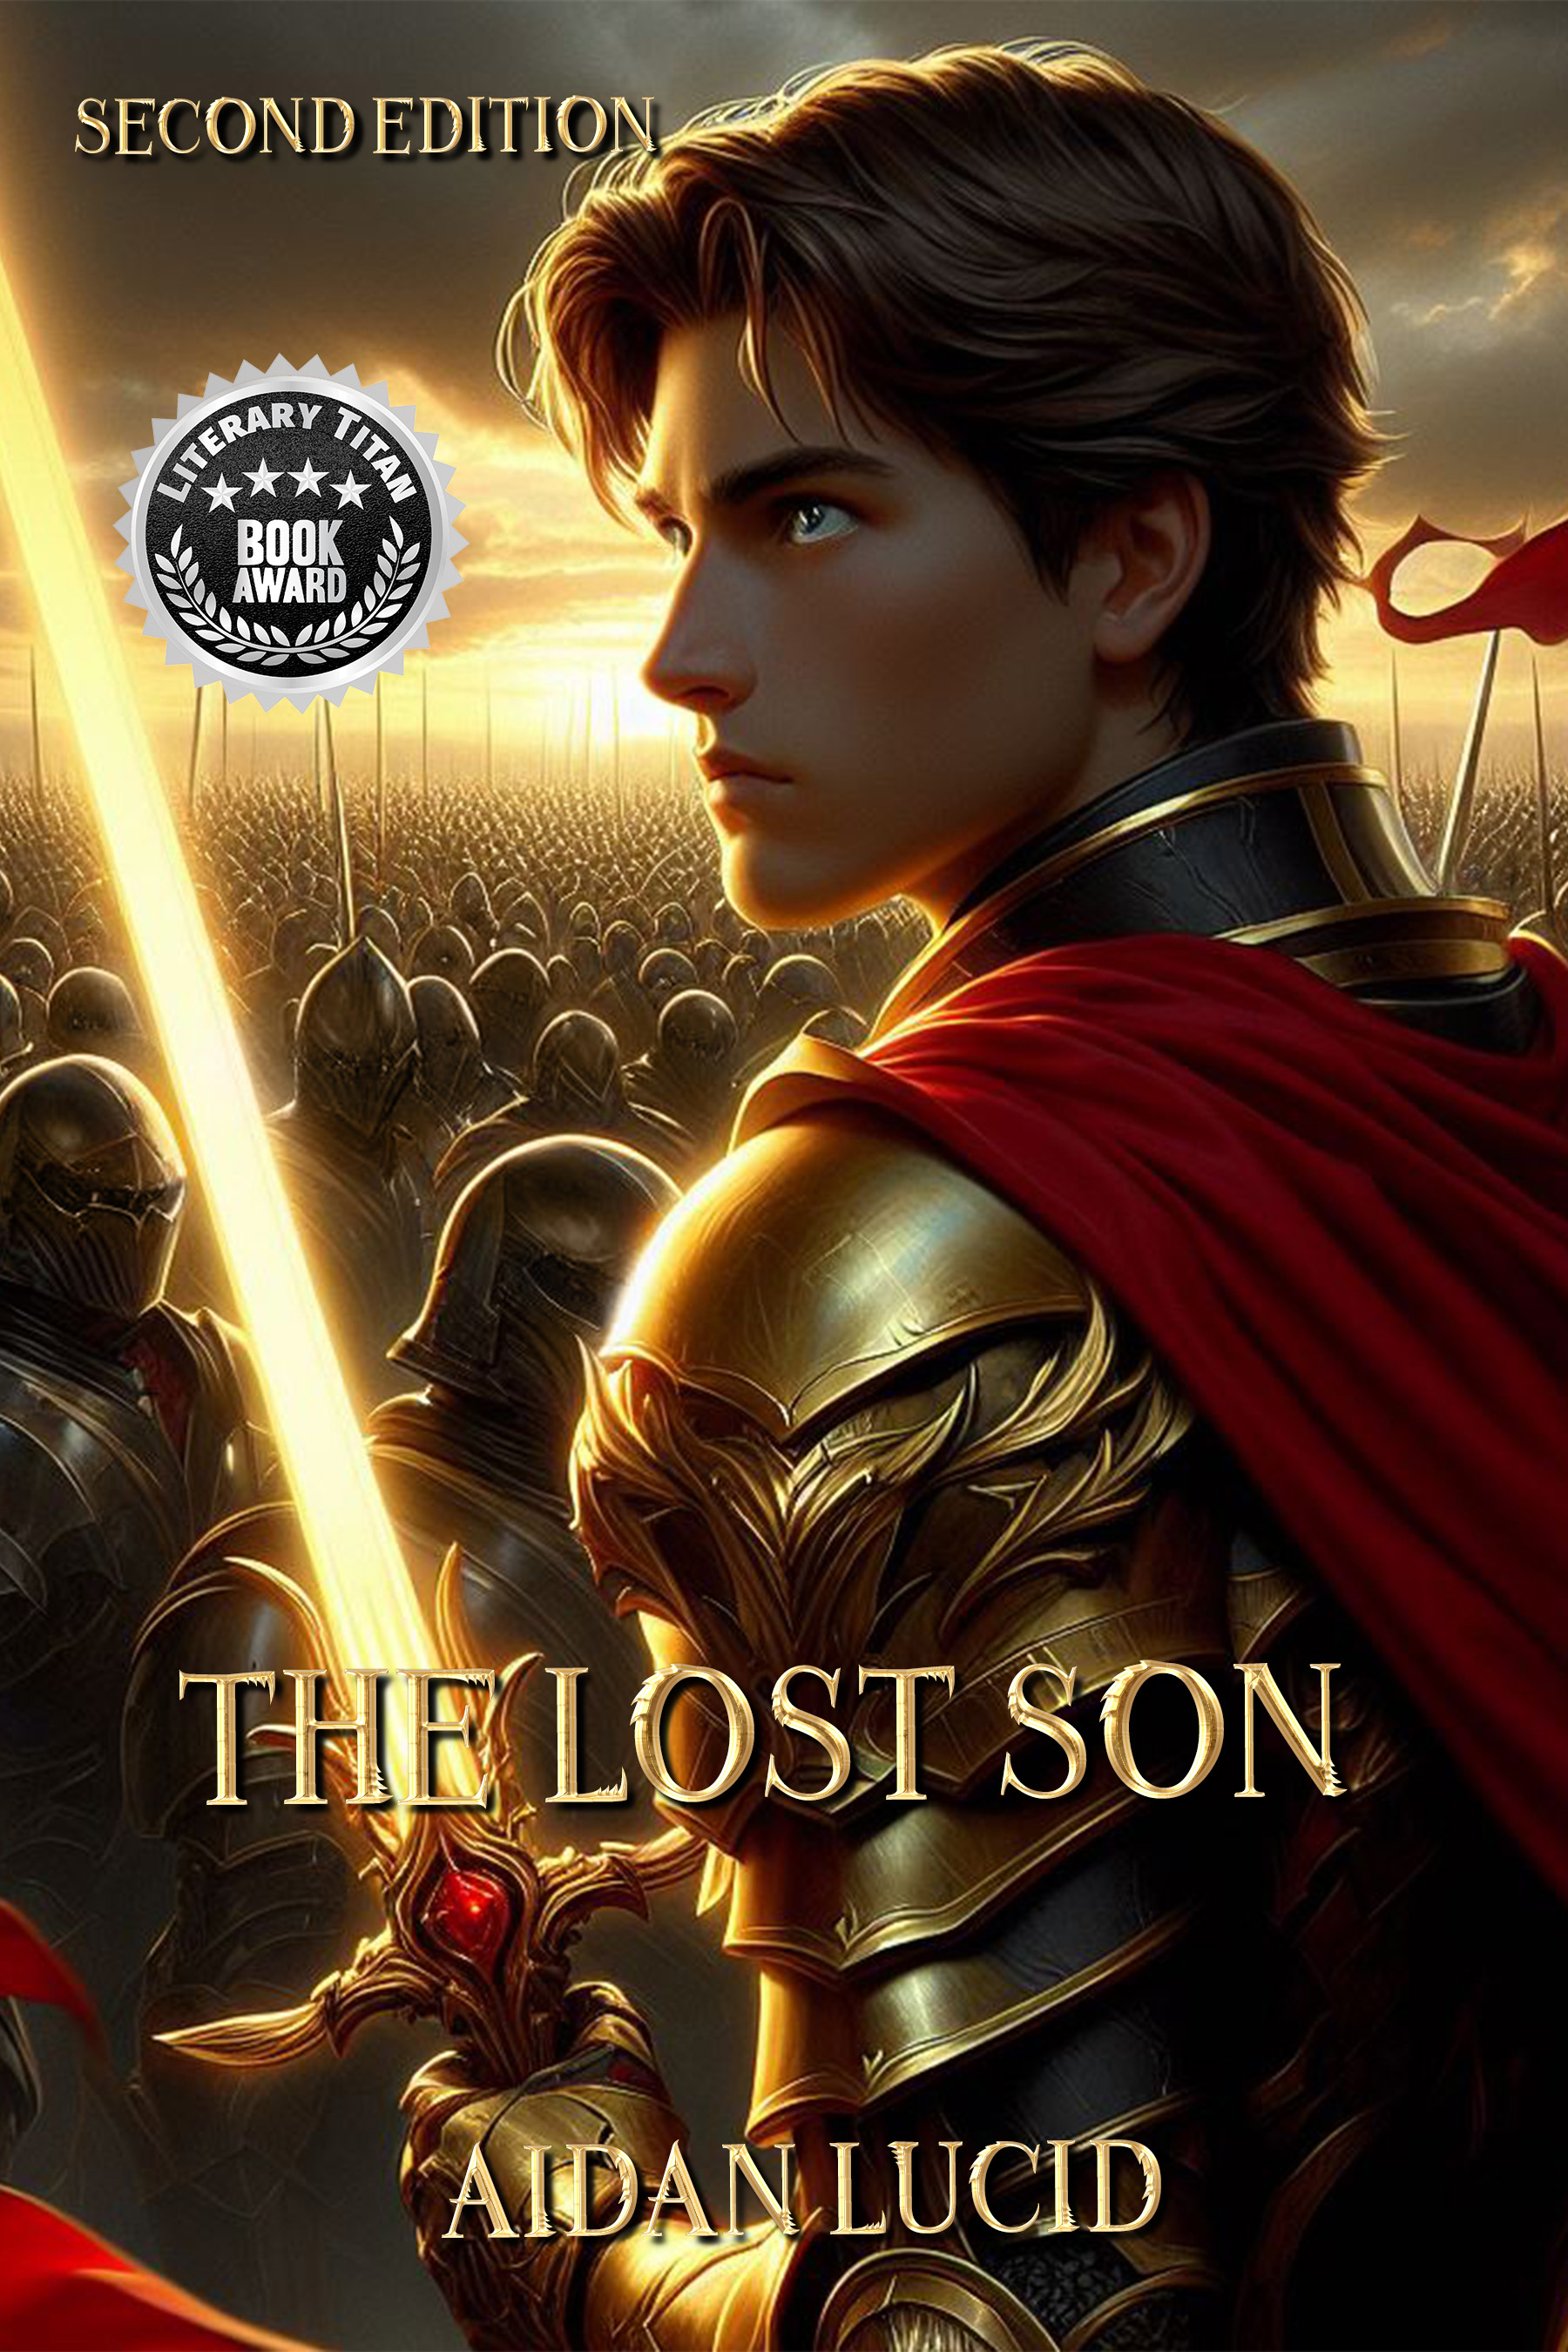 The Lost Son (Second Edition) New Cover!